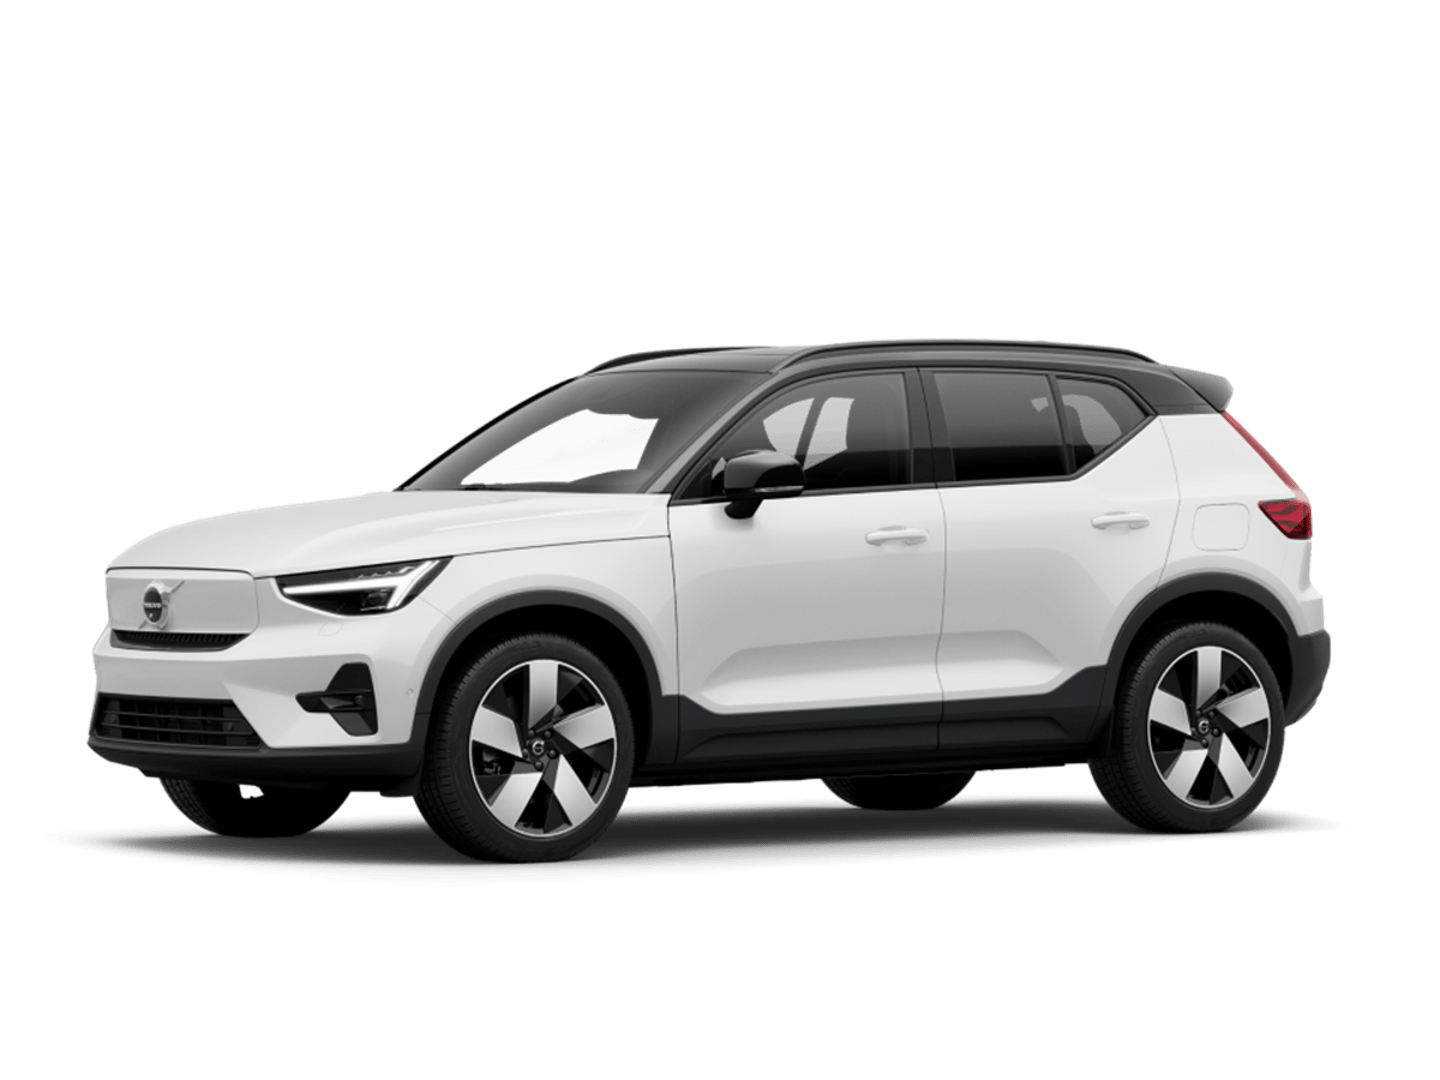 Top 5 Best Subcompact Luxury SUVs for a Luxurious Ride